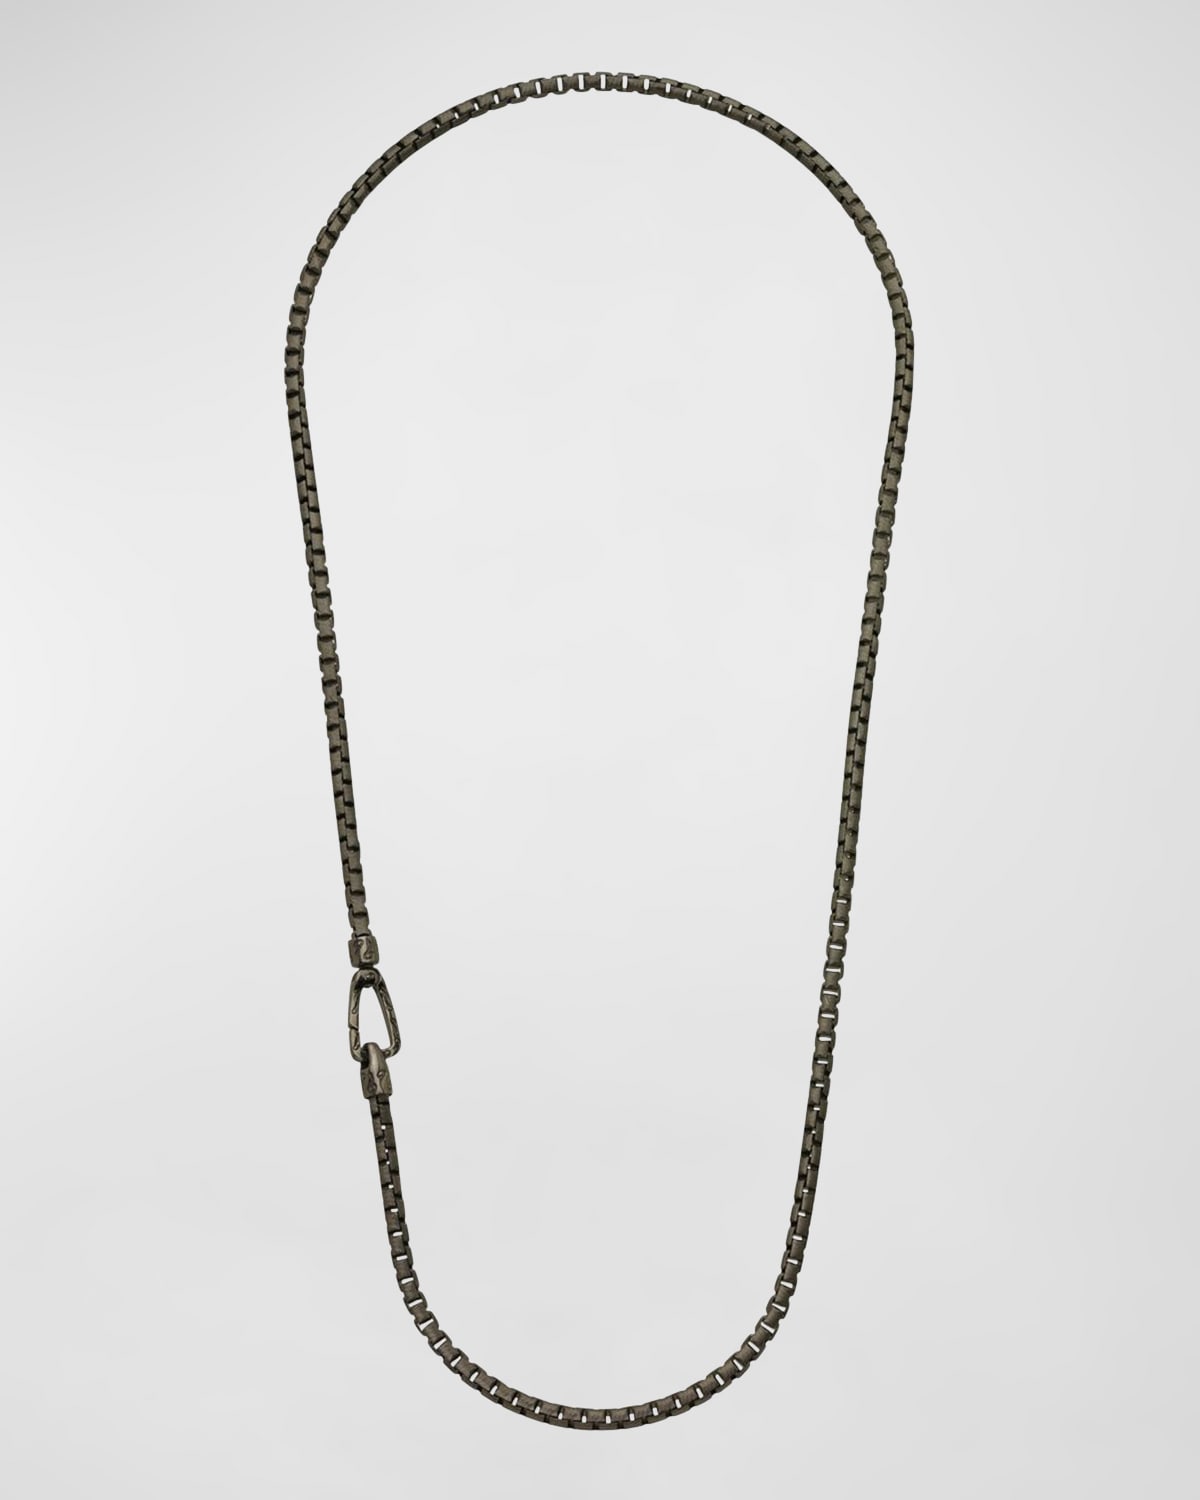 Marco Dal Maso Carved Tubular Burnished Silver Necklace With Matte Chain And Polished Clasp, 20"l